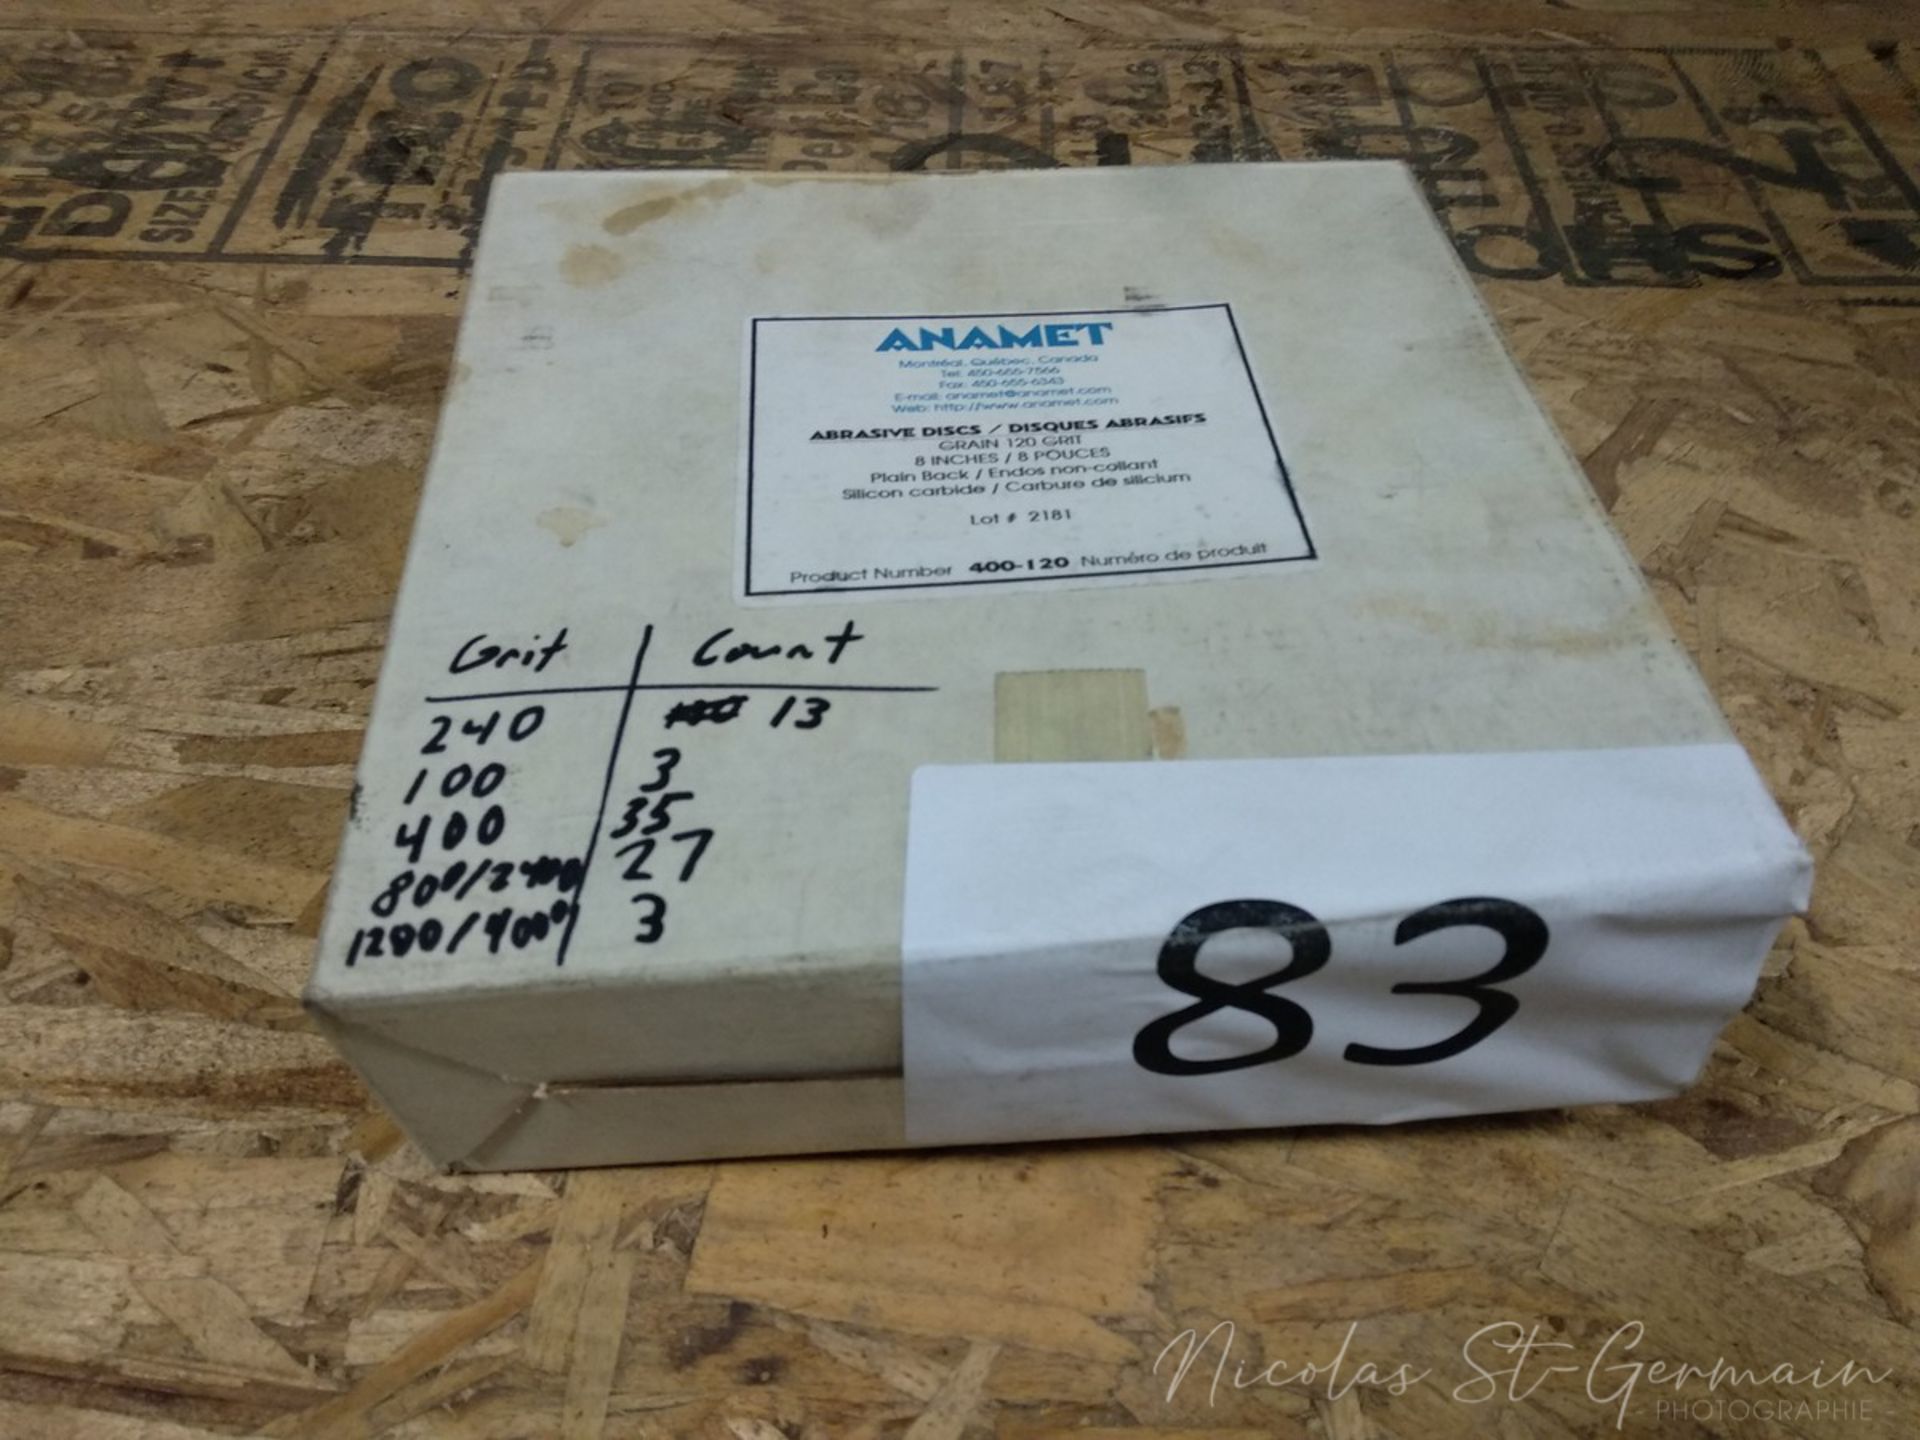 Assorted Abrasive Disks, 81 count - Image 2 of 3